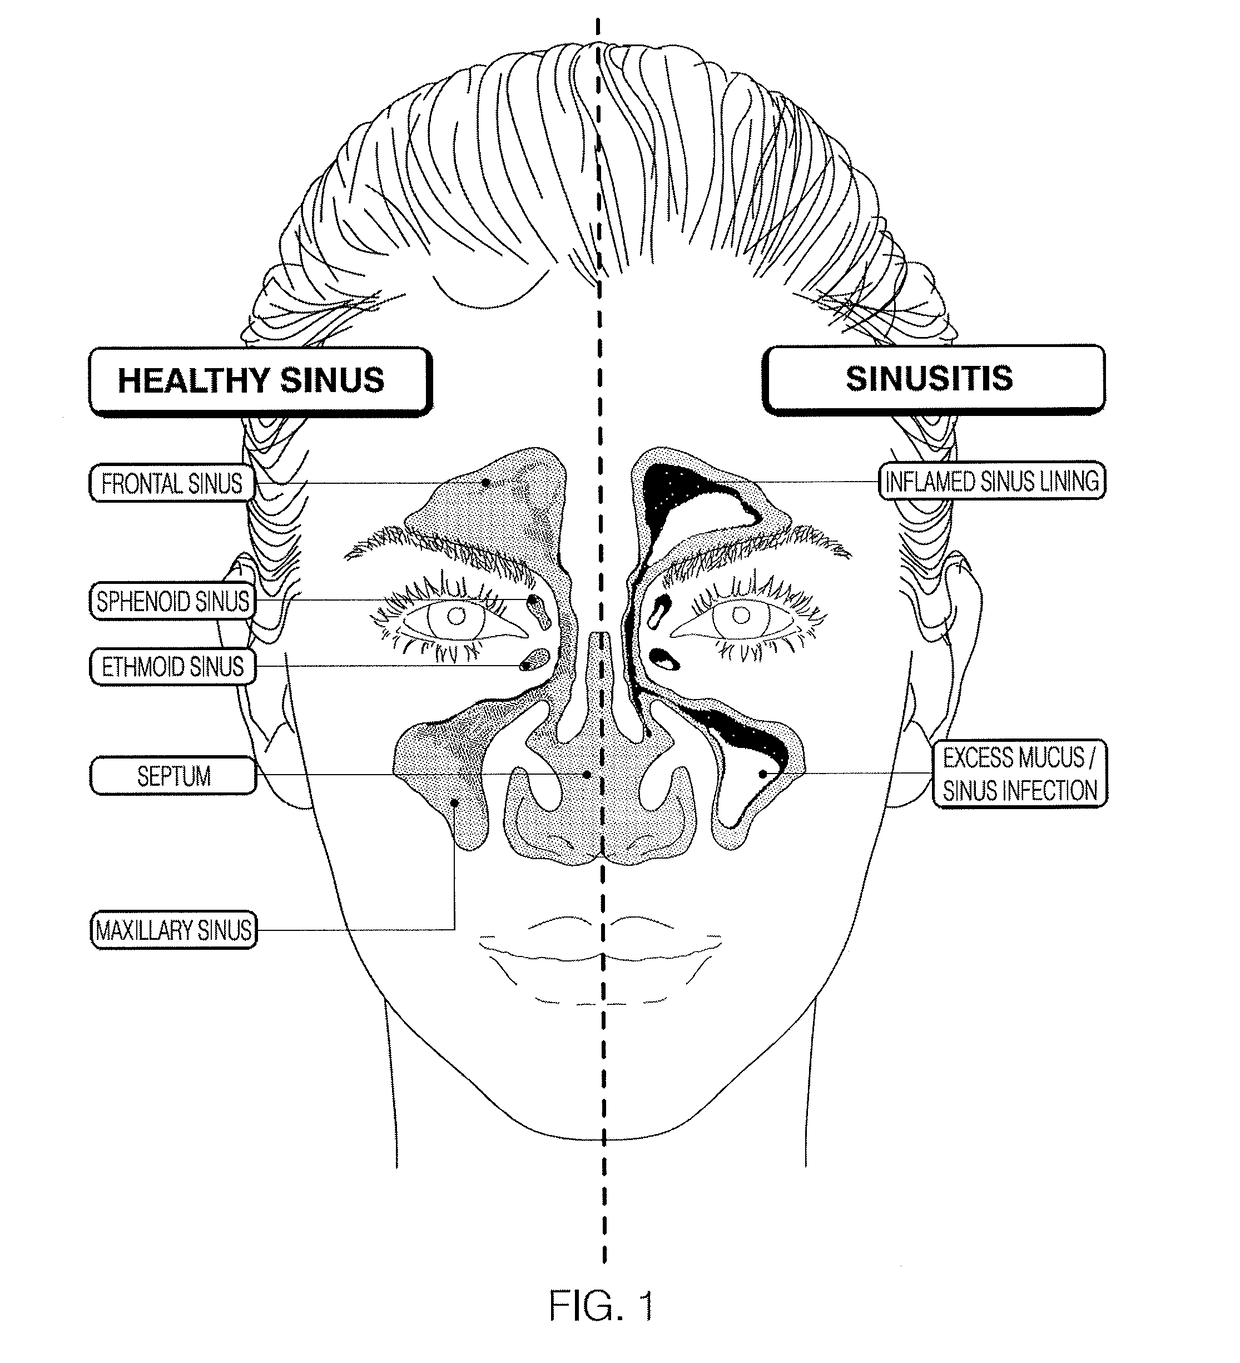 Devices and assays for diagnosis of sinusitis